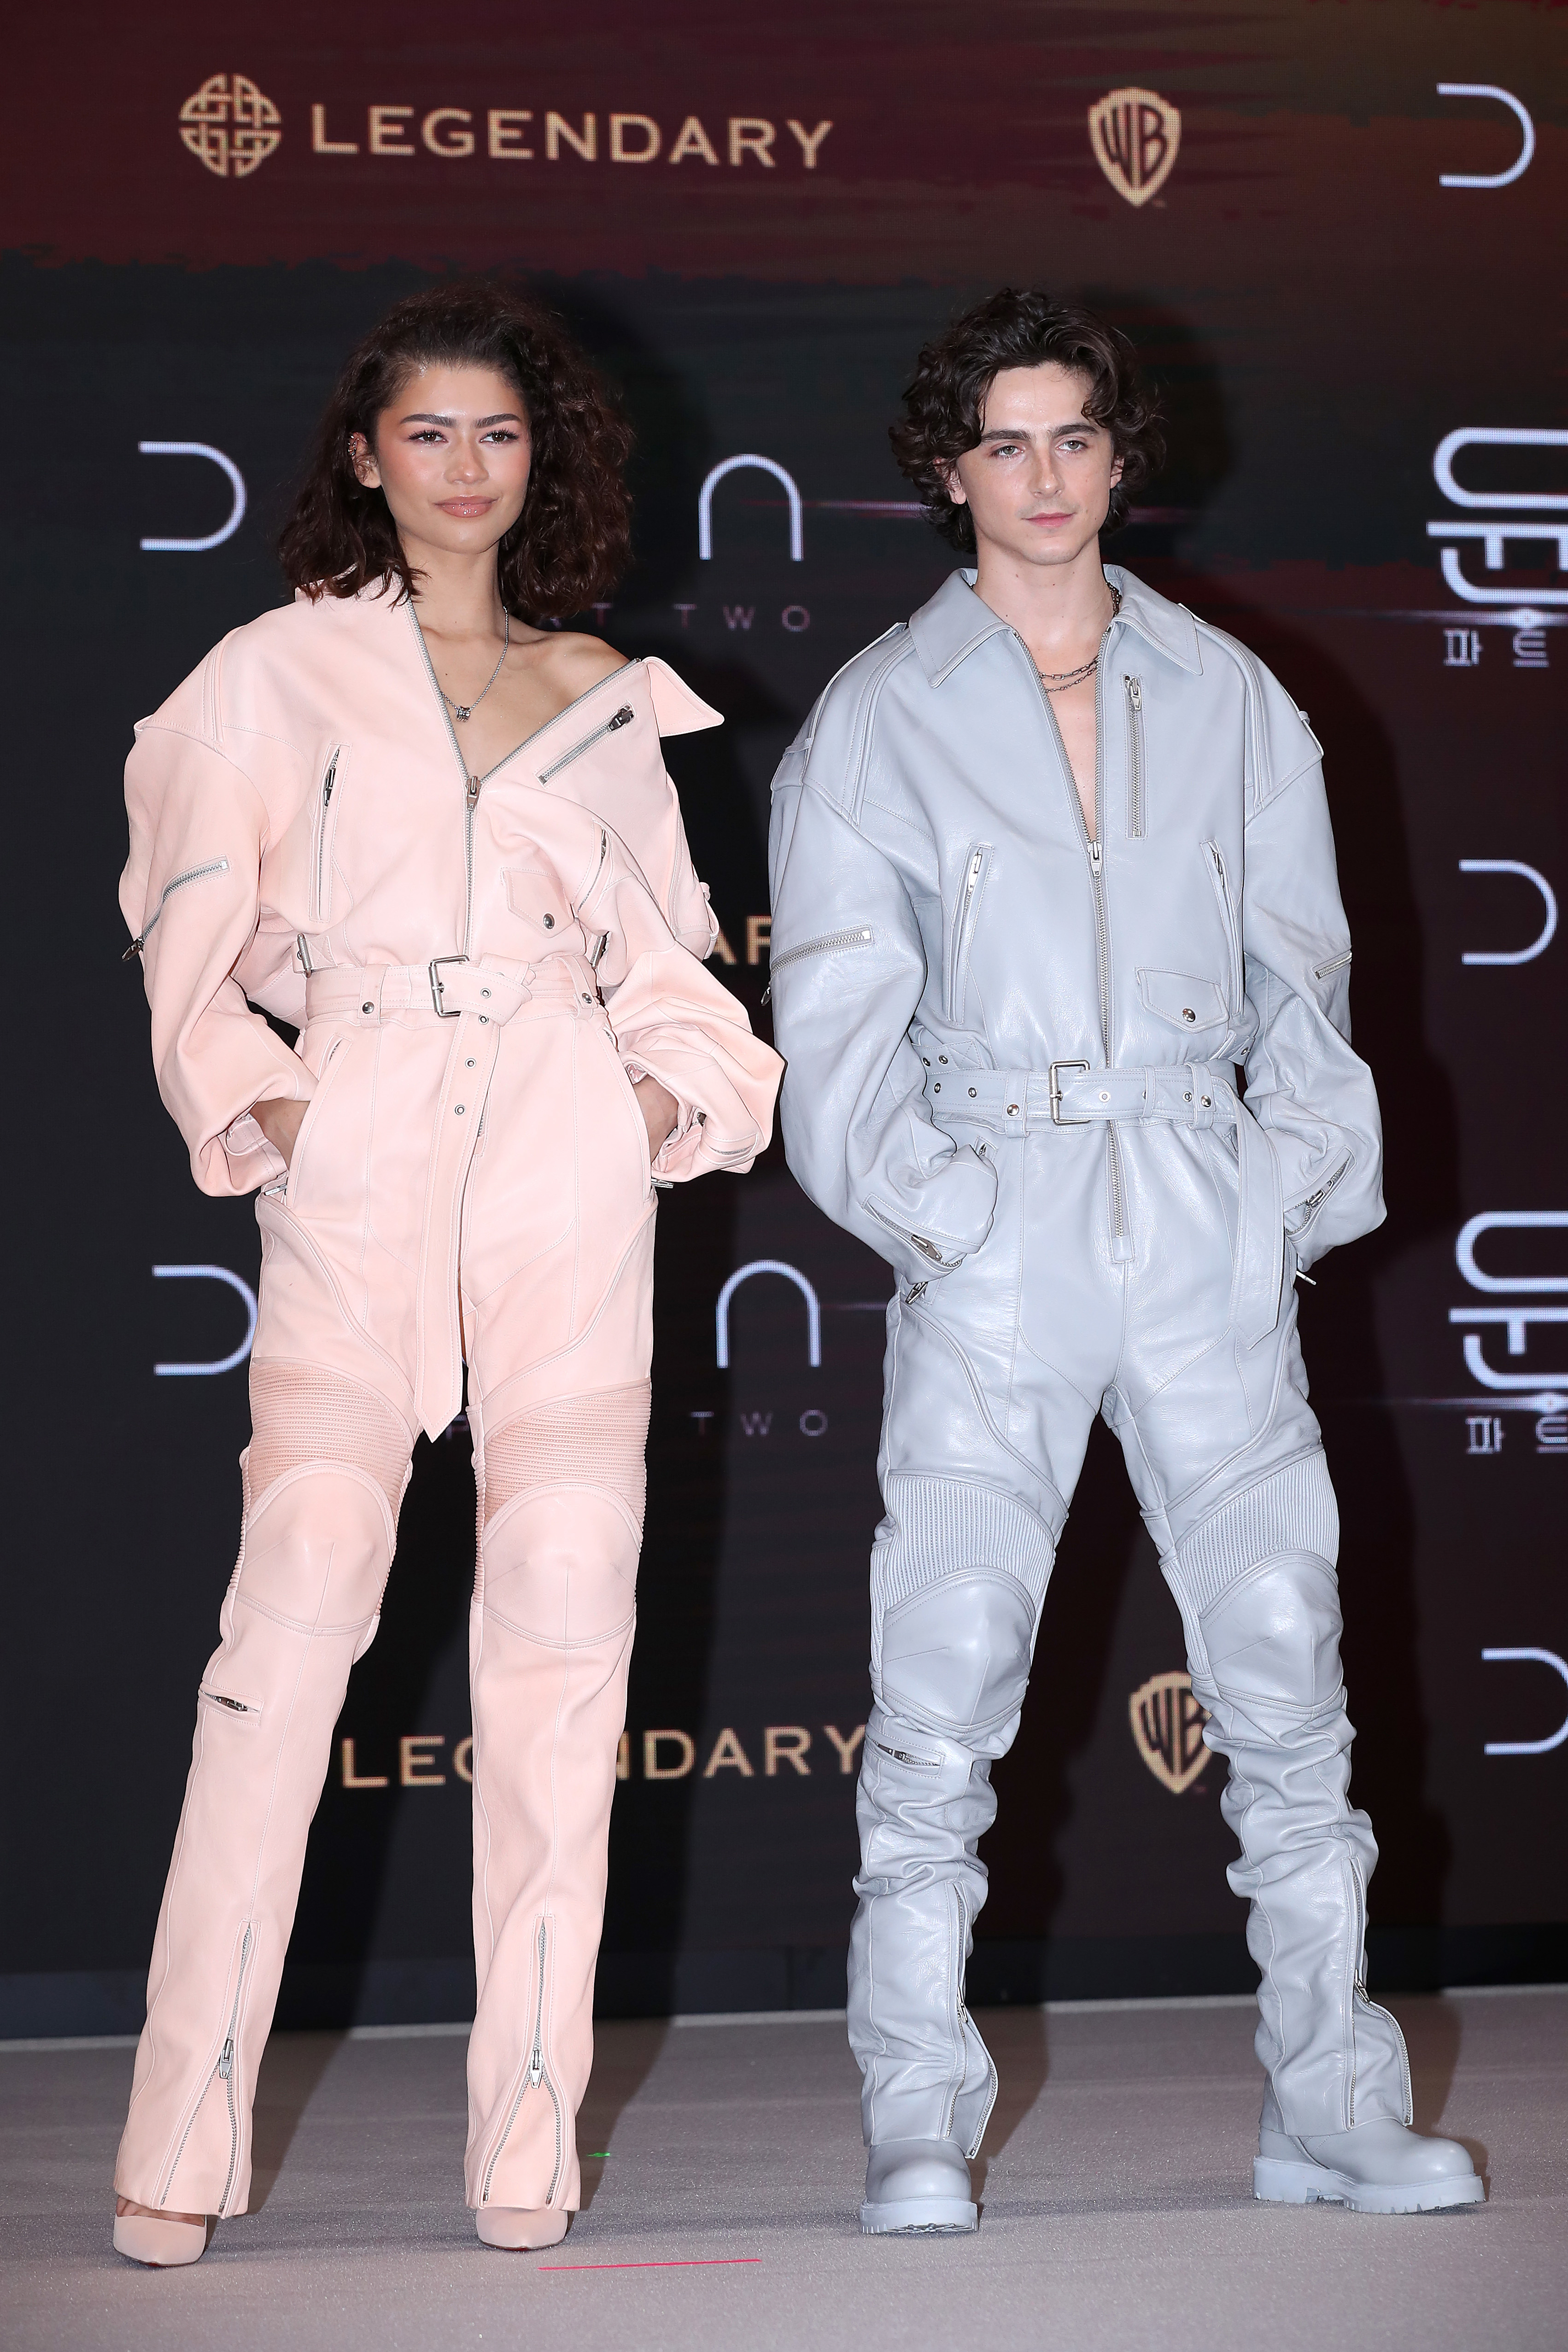 Zendaya and Timothée Chalamet at an event, both wearing stylish, monochromatic outfits and boots